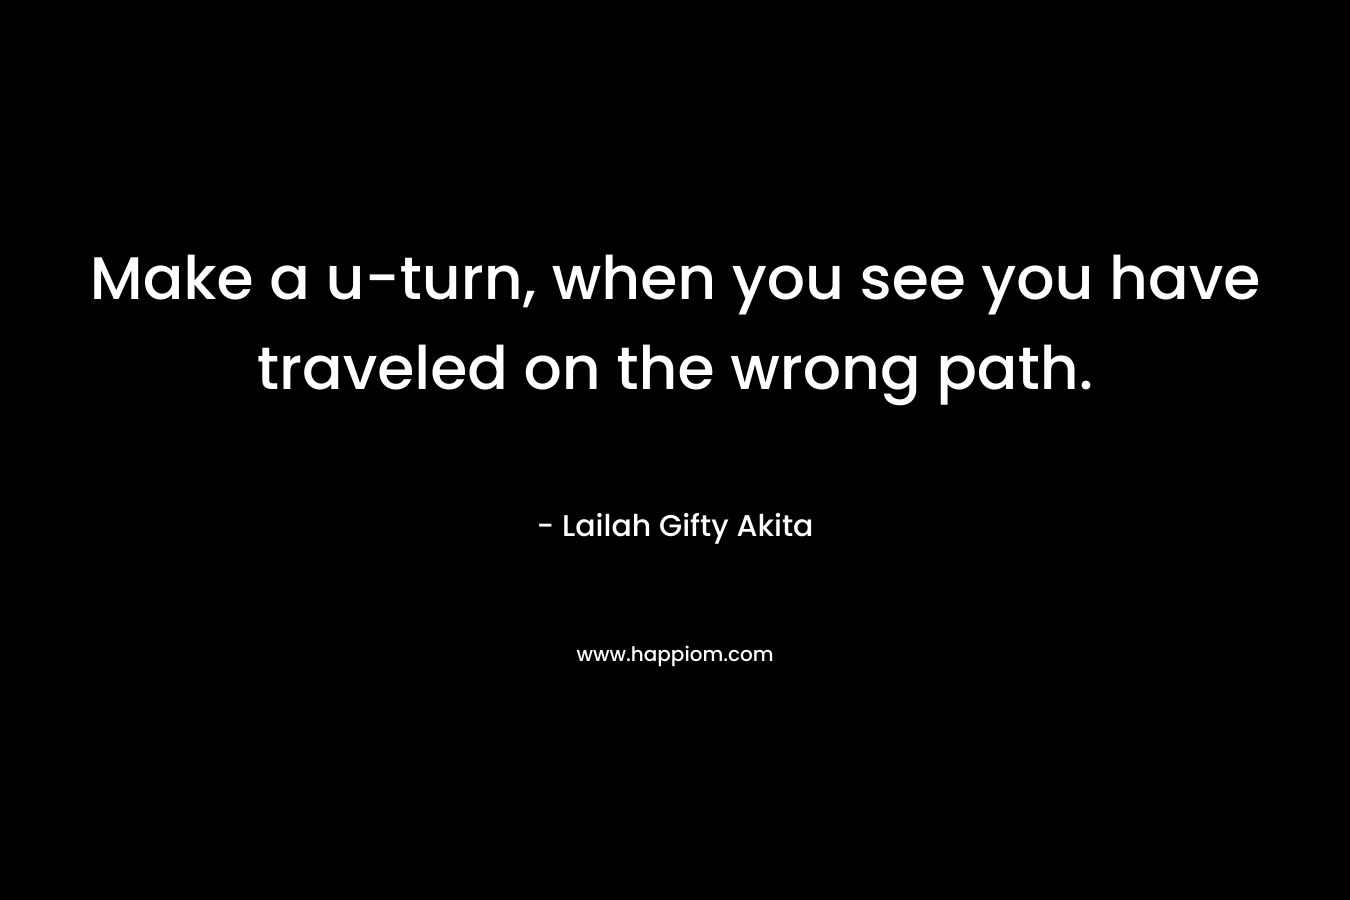 Make a u-turn, when you see you have traveled on the wrong path.